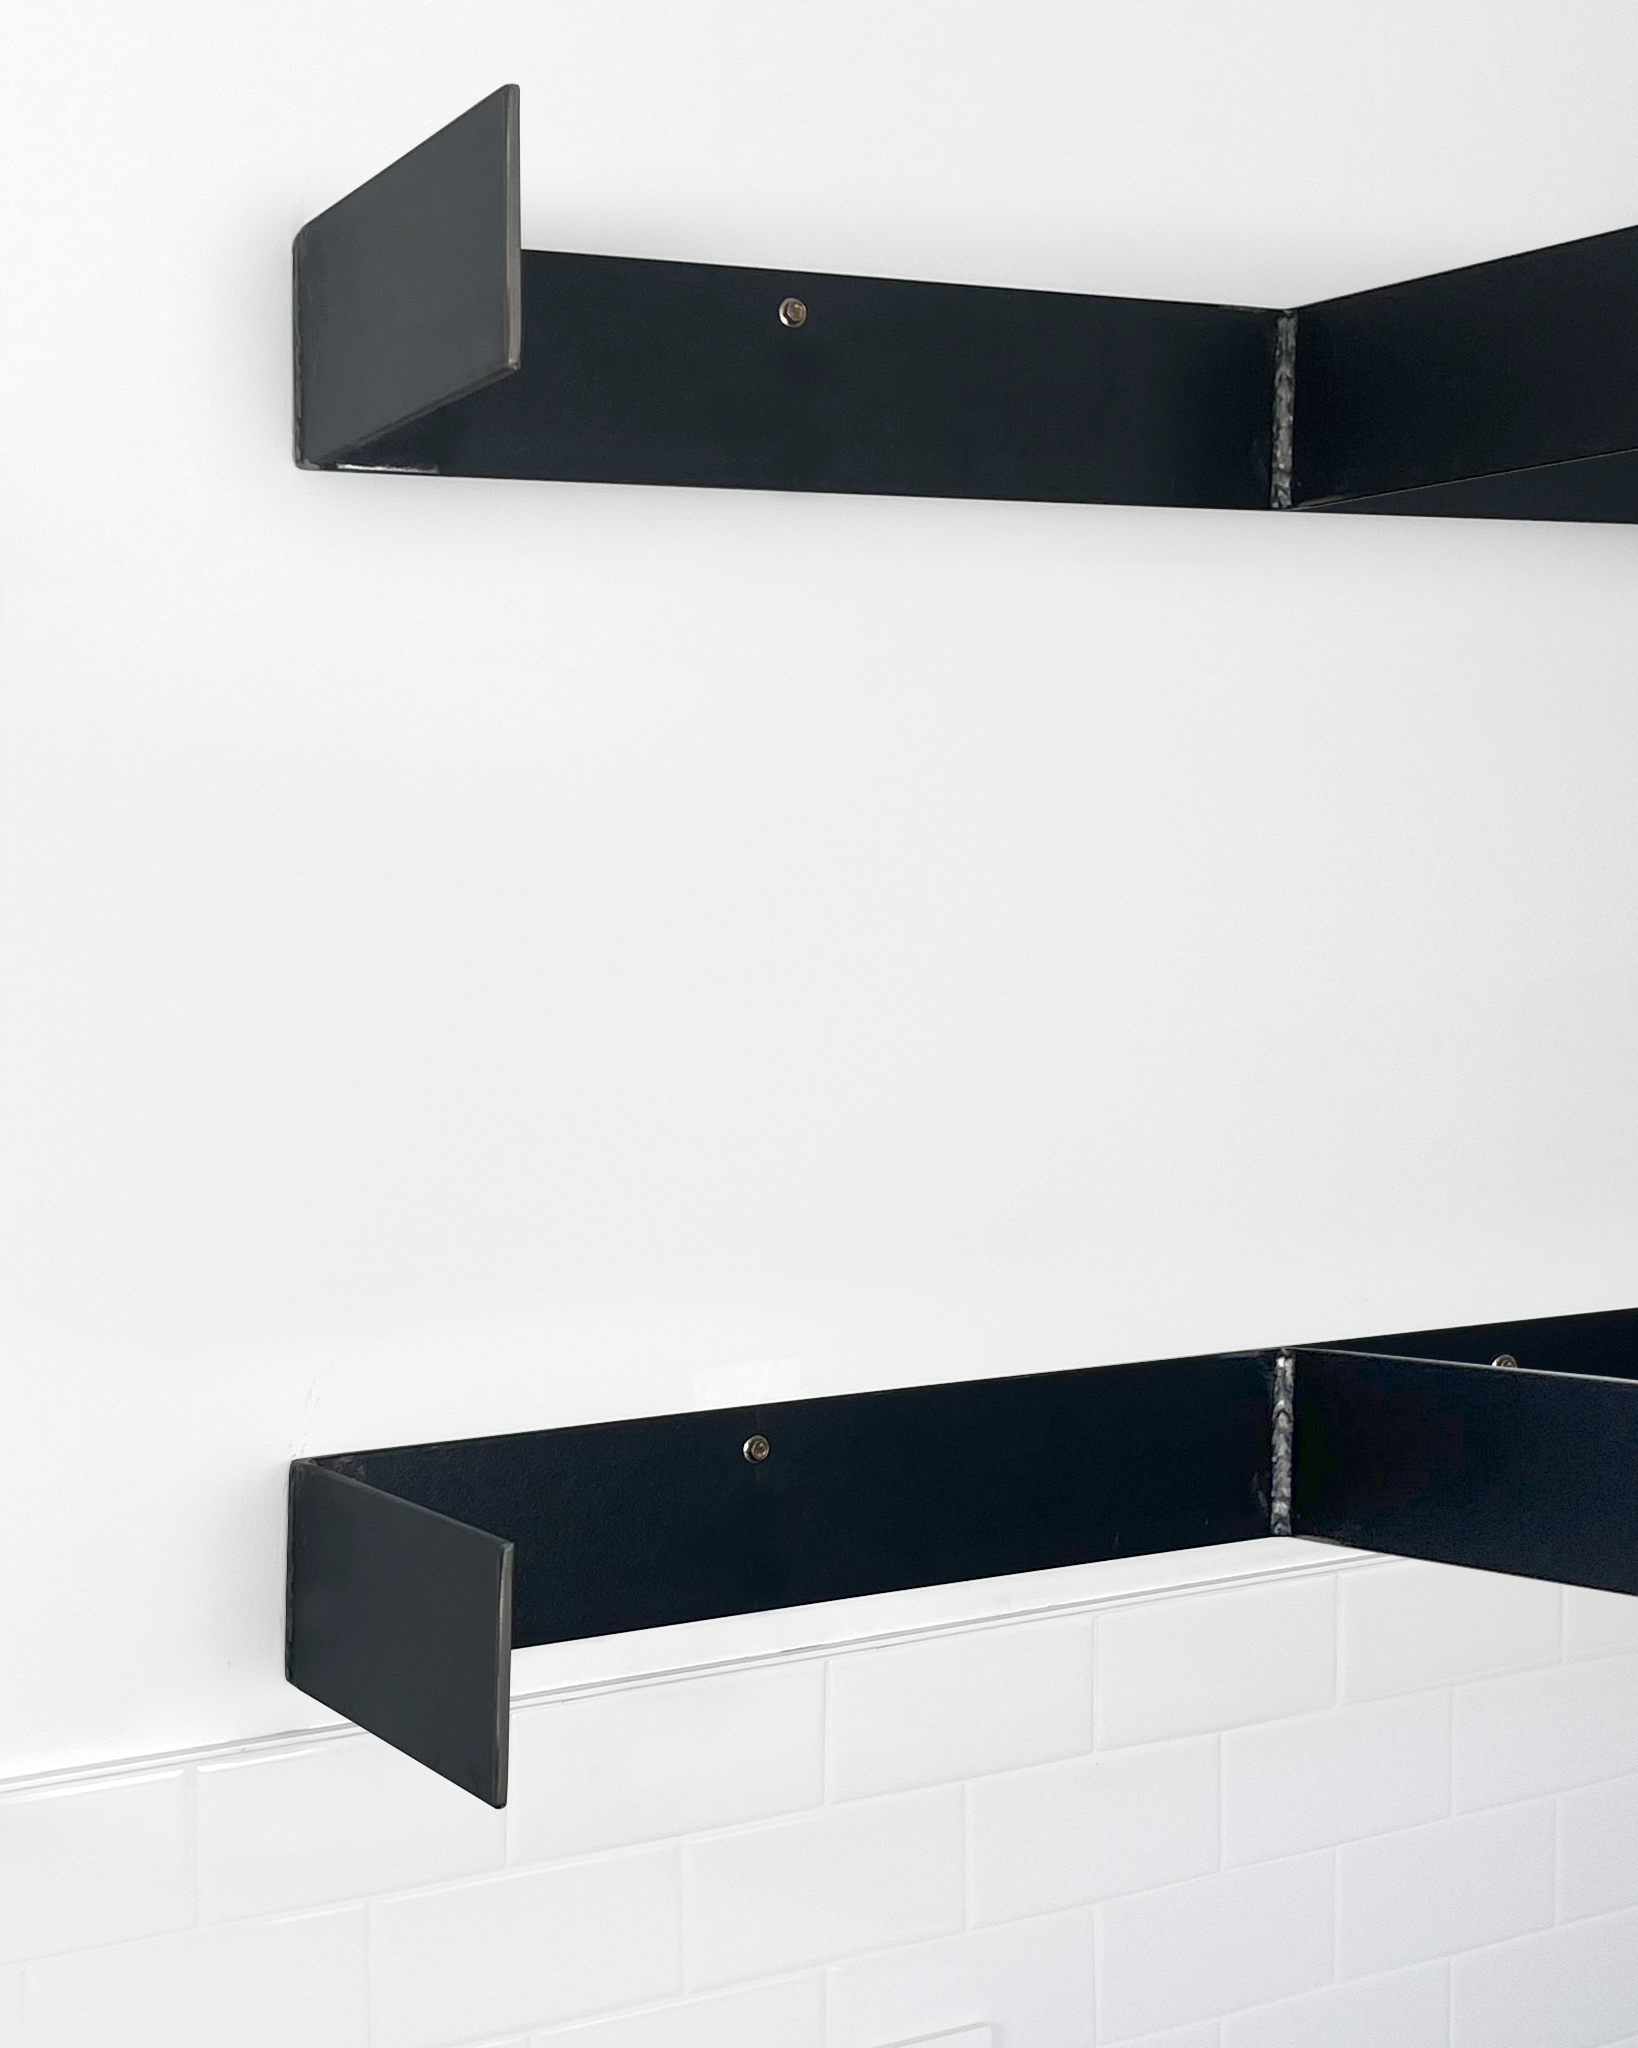 Cherry Floating Shelves 4.1-6" thick